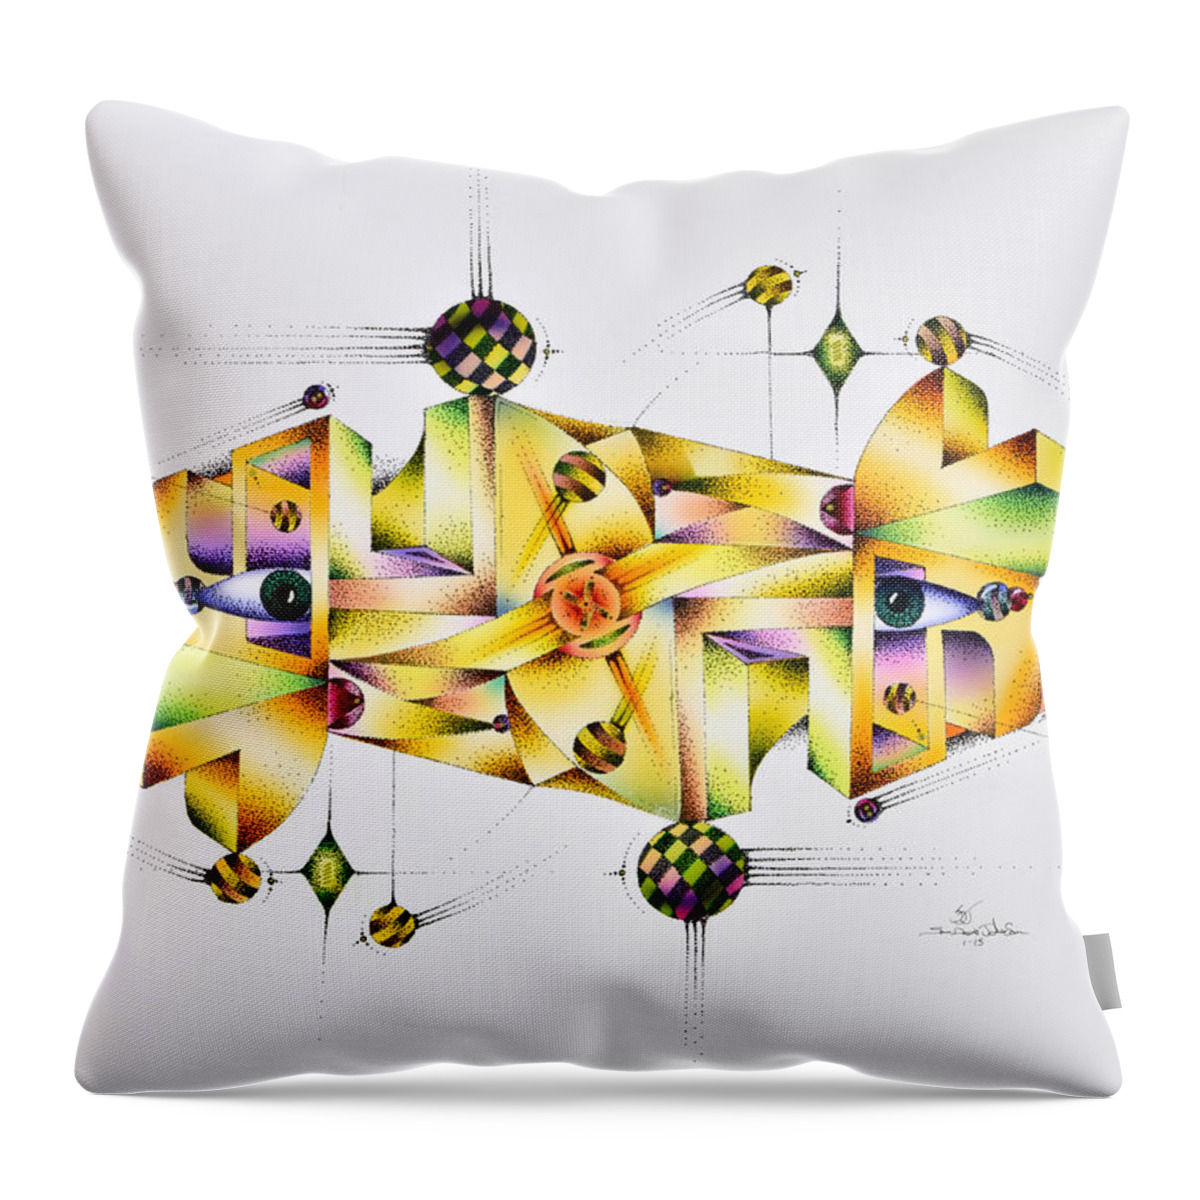 Pen & Ink Throw Pillow featuring the mixed media Starity by Sam Davis Johnson